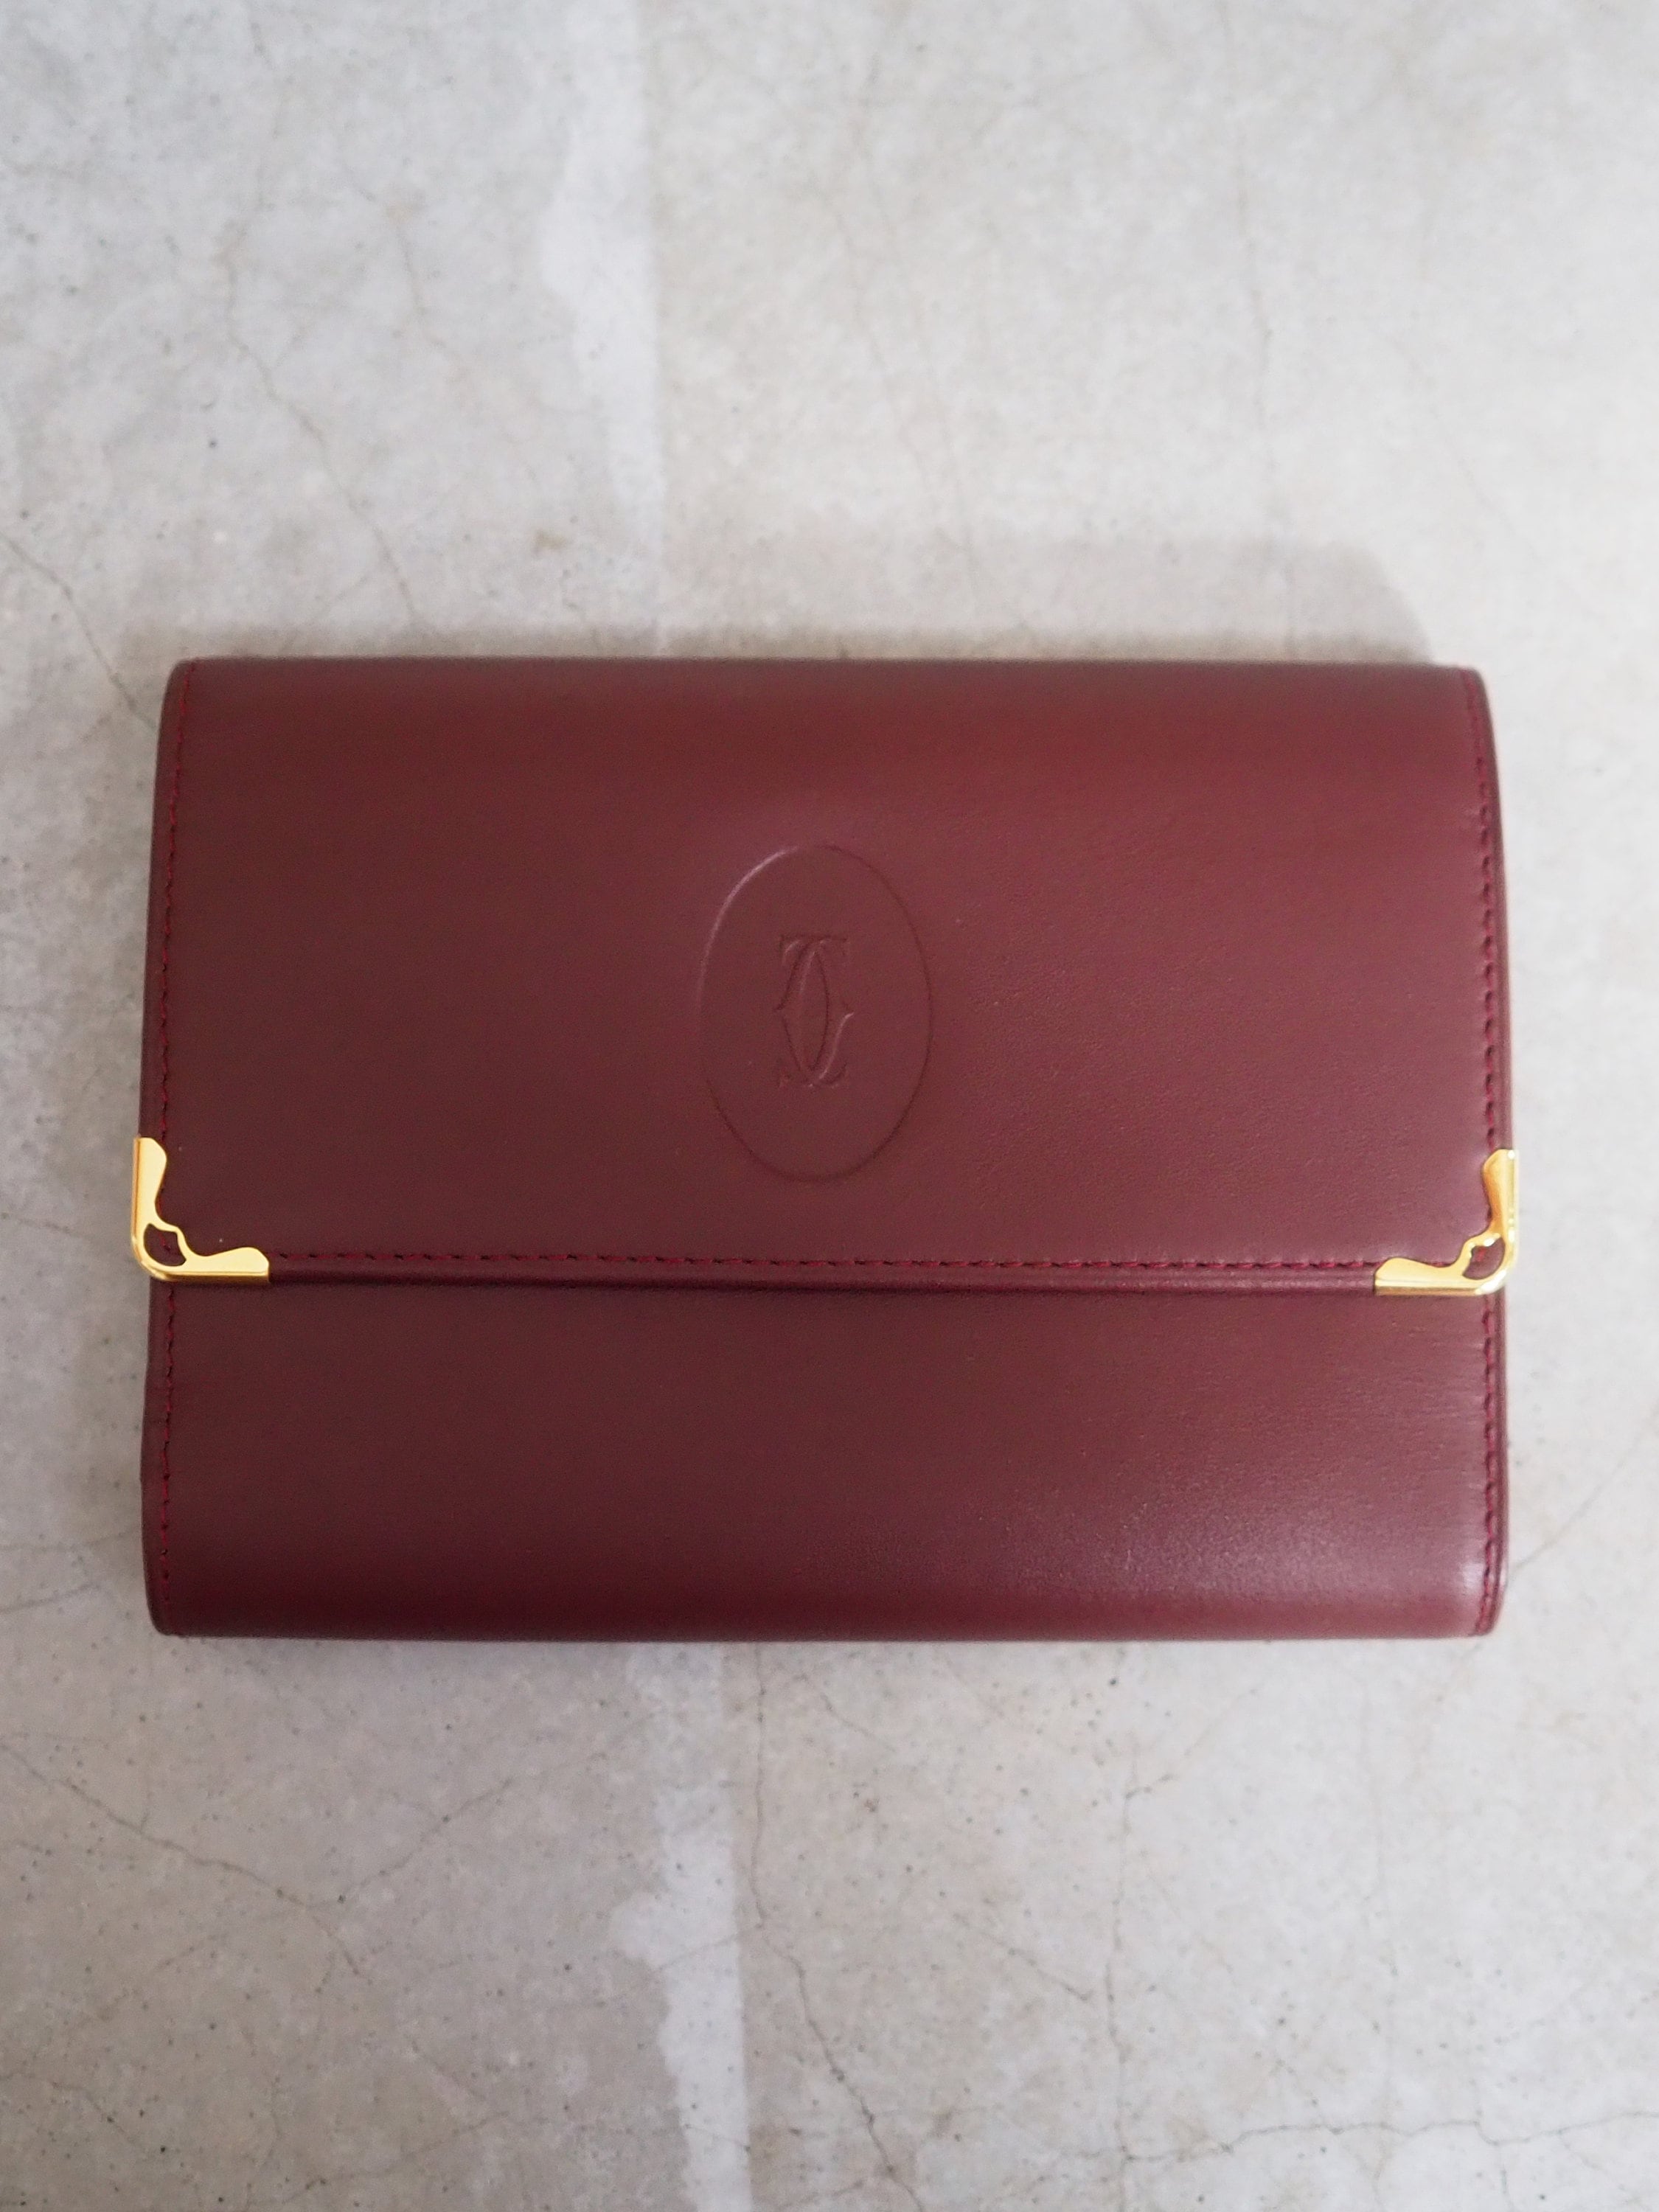 Cartier Wallet Red Leather MASTLINE Threefold Vintage Authentic